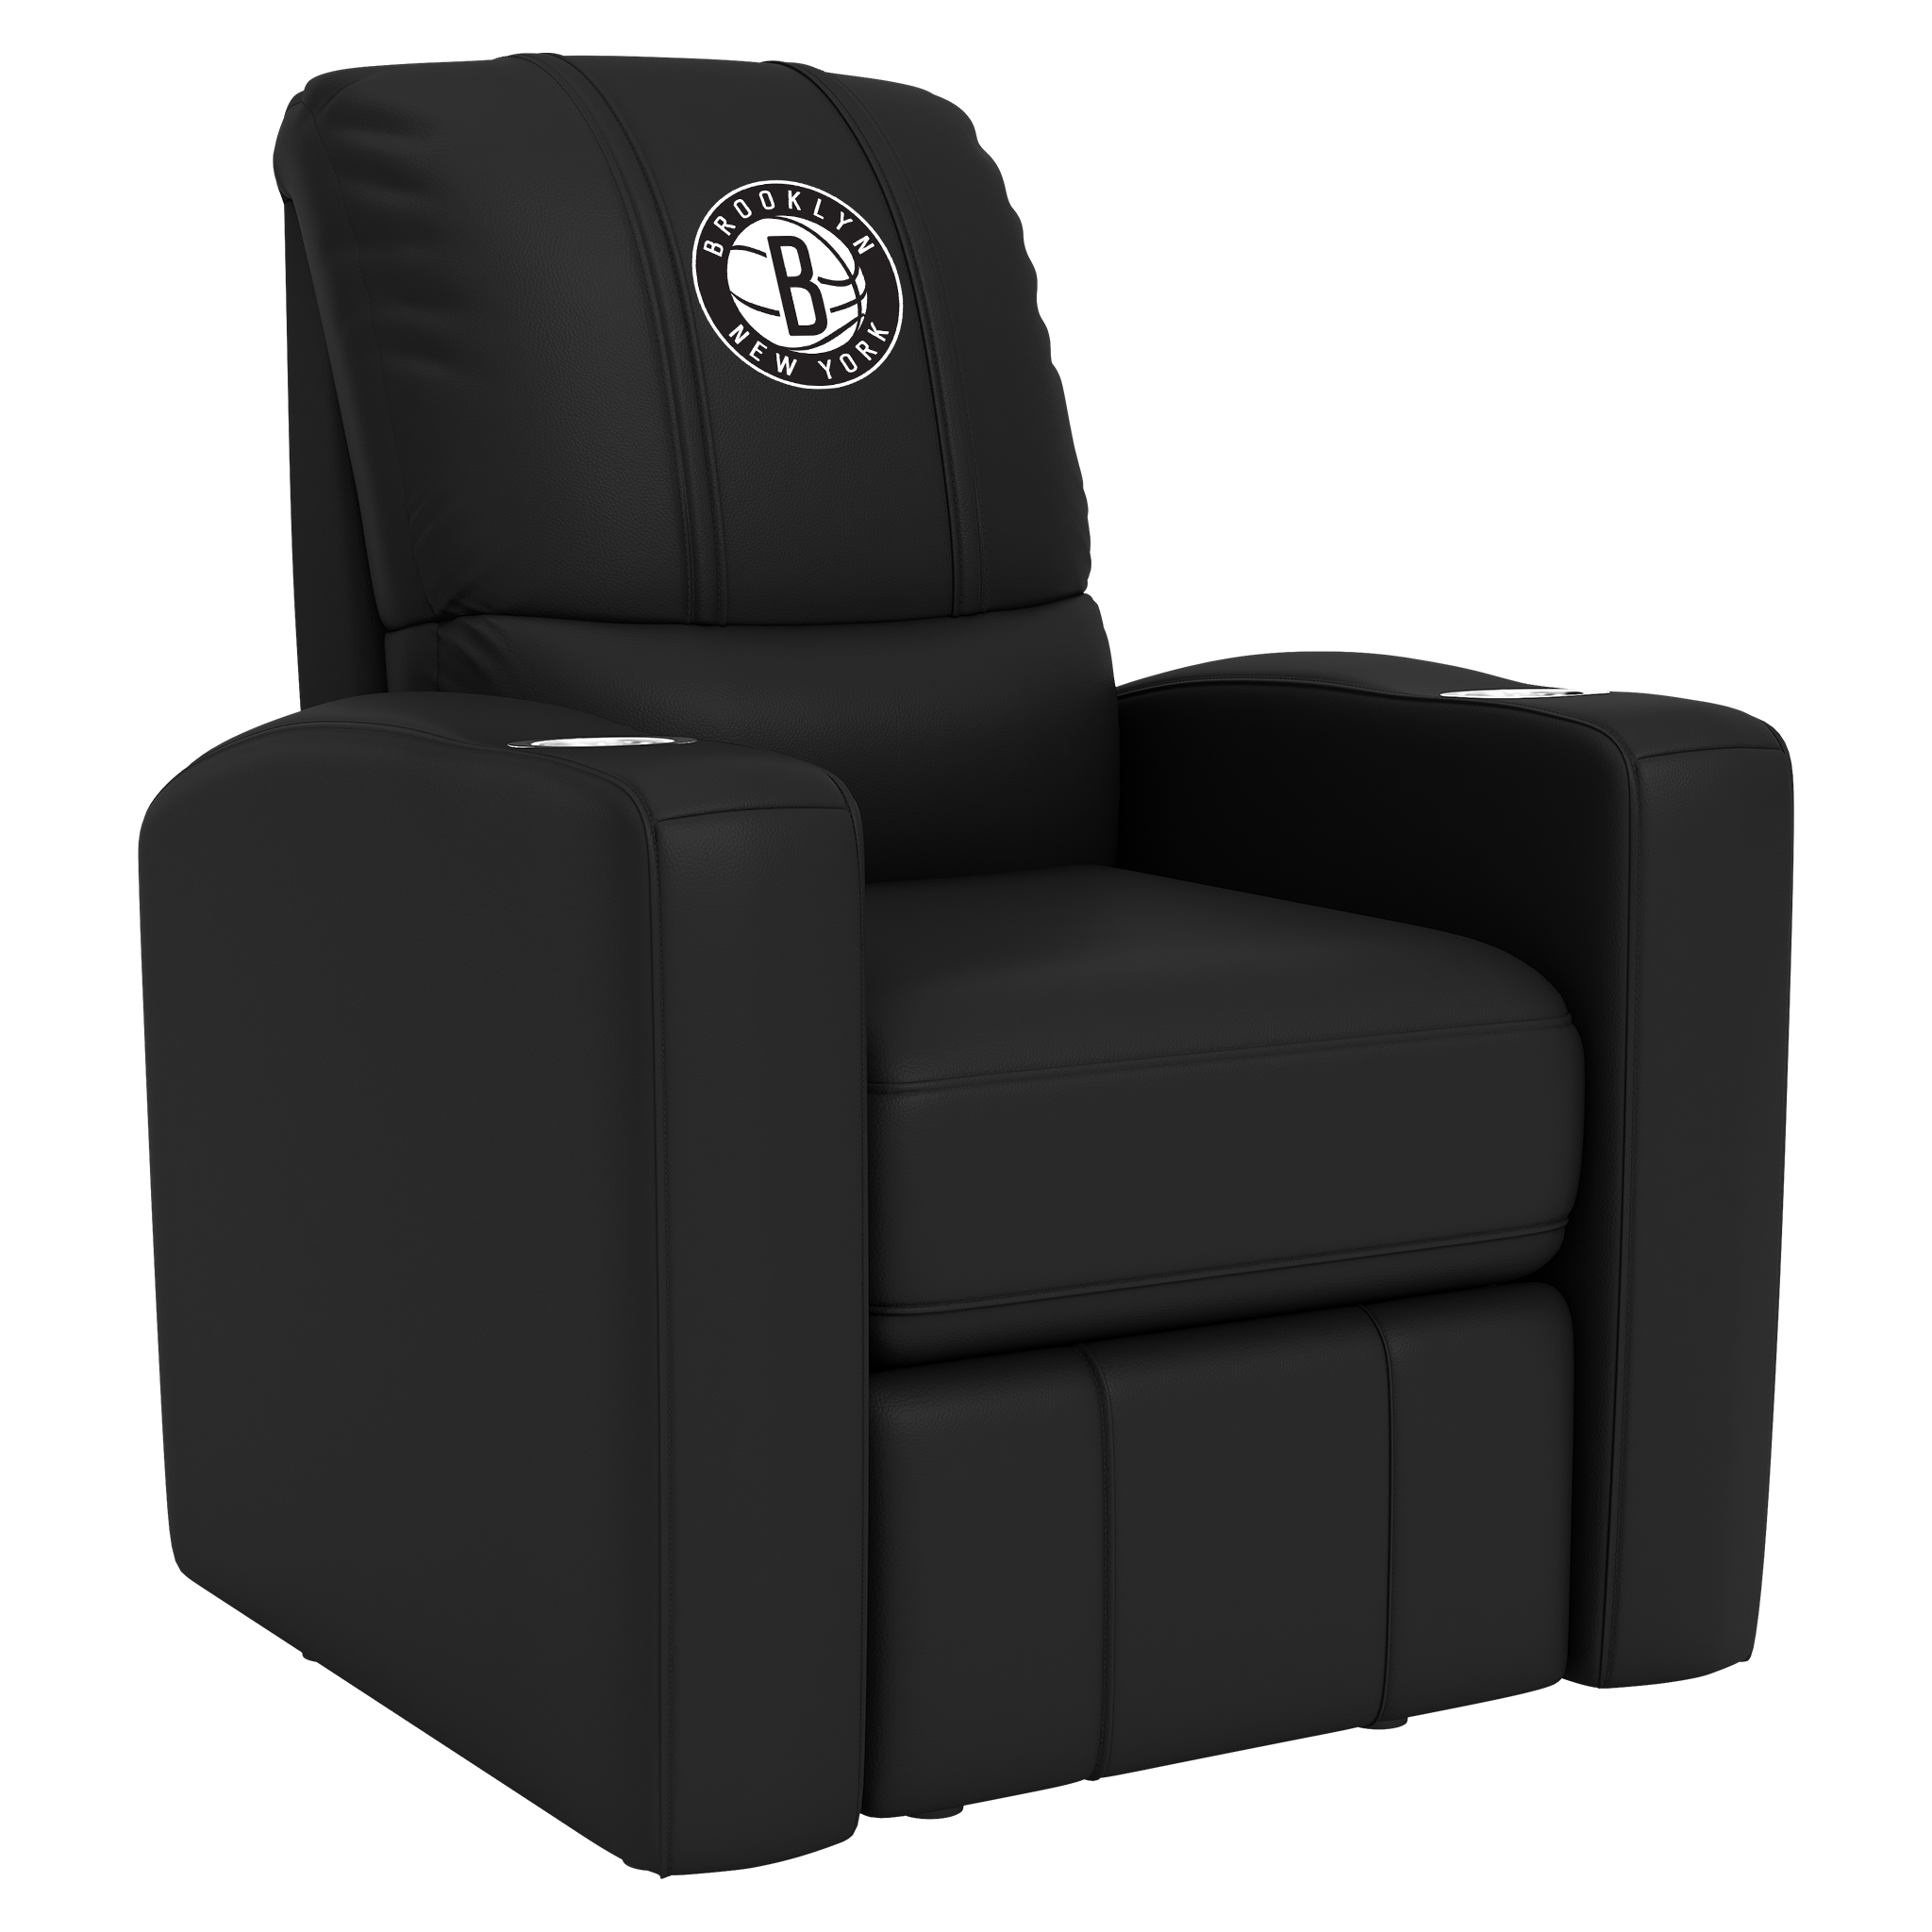 Brooklyn Nets Stealth Recliner with Brooklyn Nets Secondary